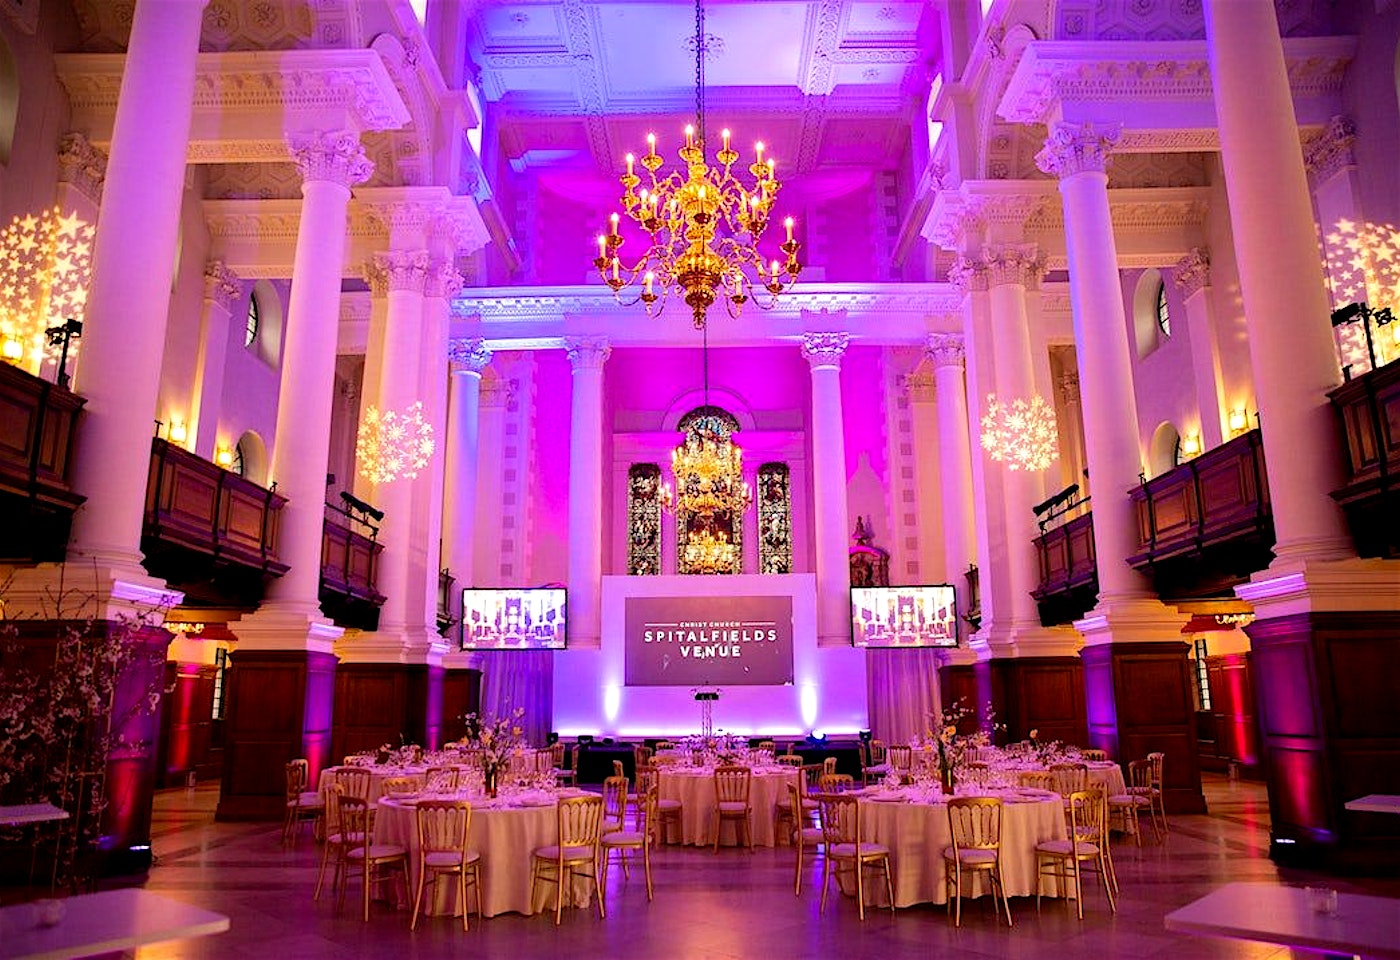 The Nave Spitalfields London Banqueting Hall